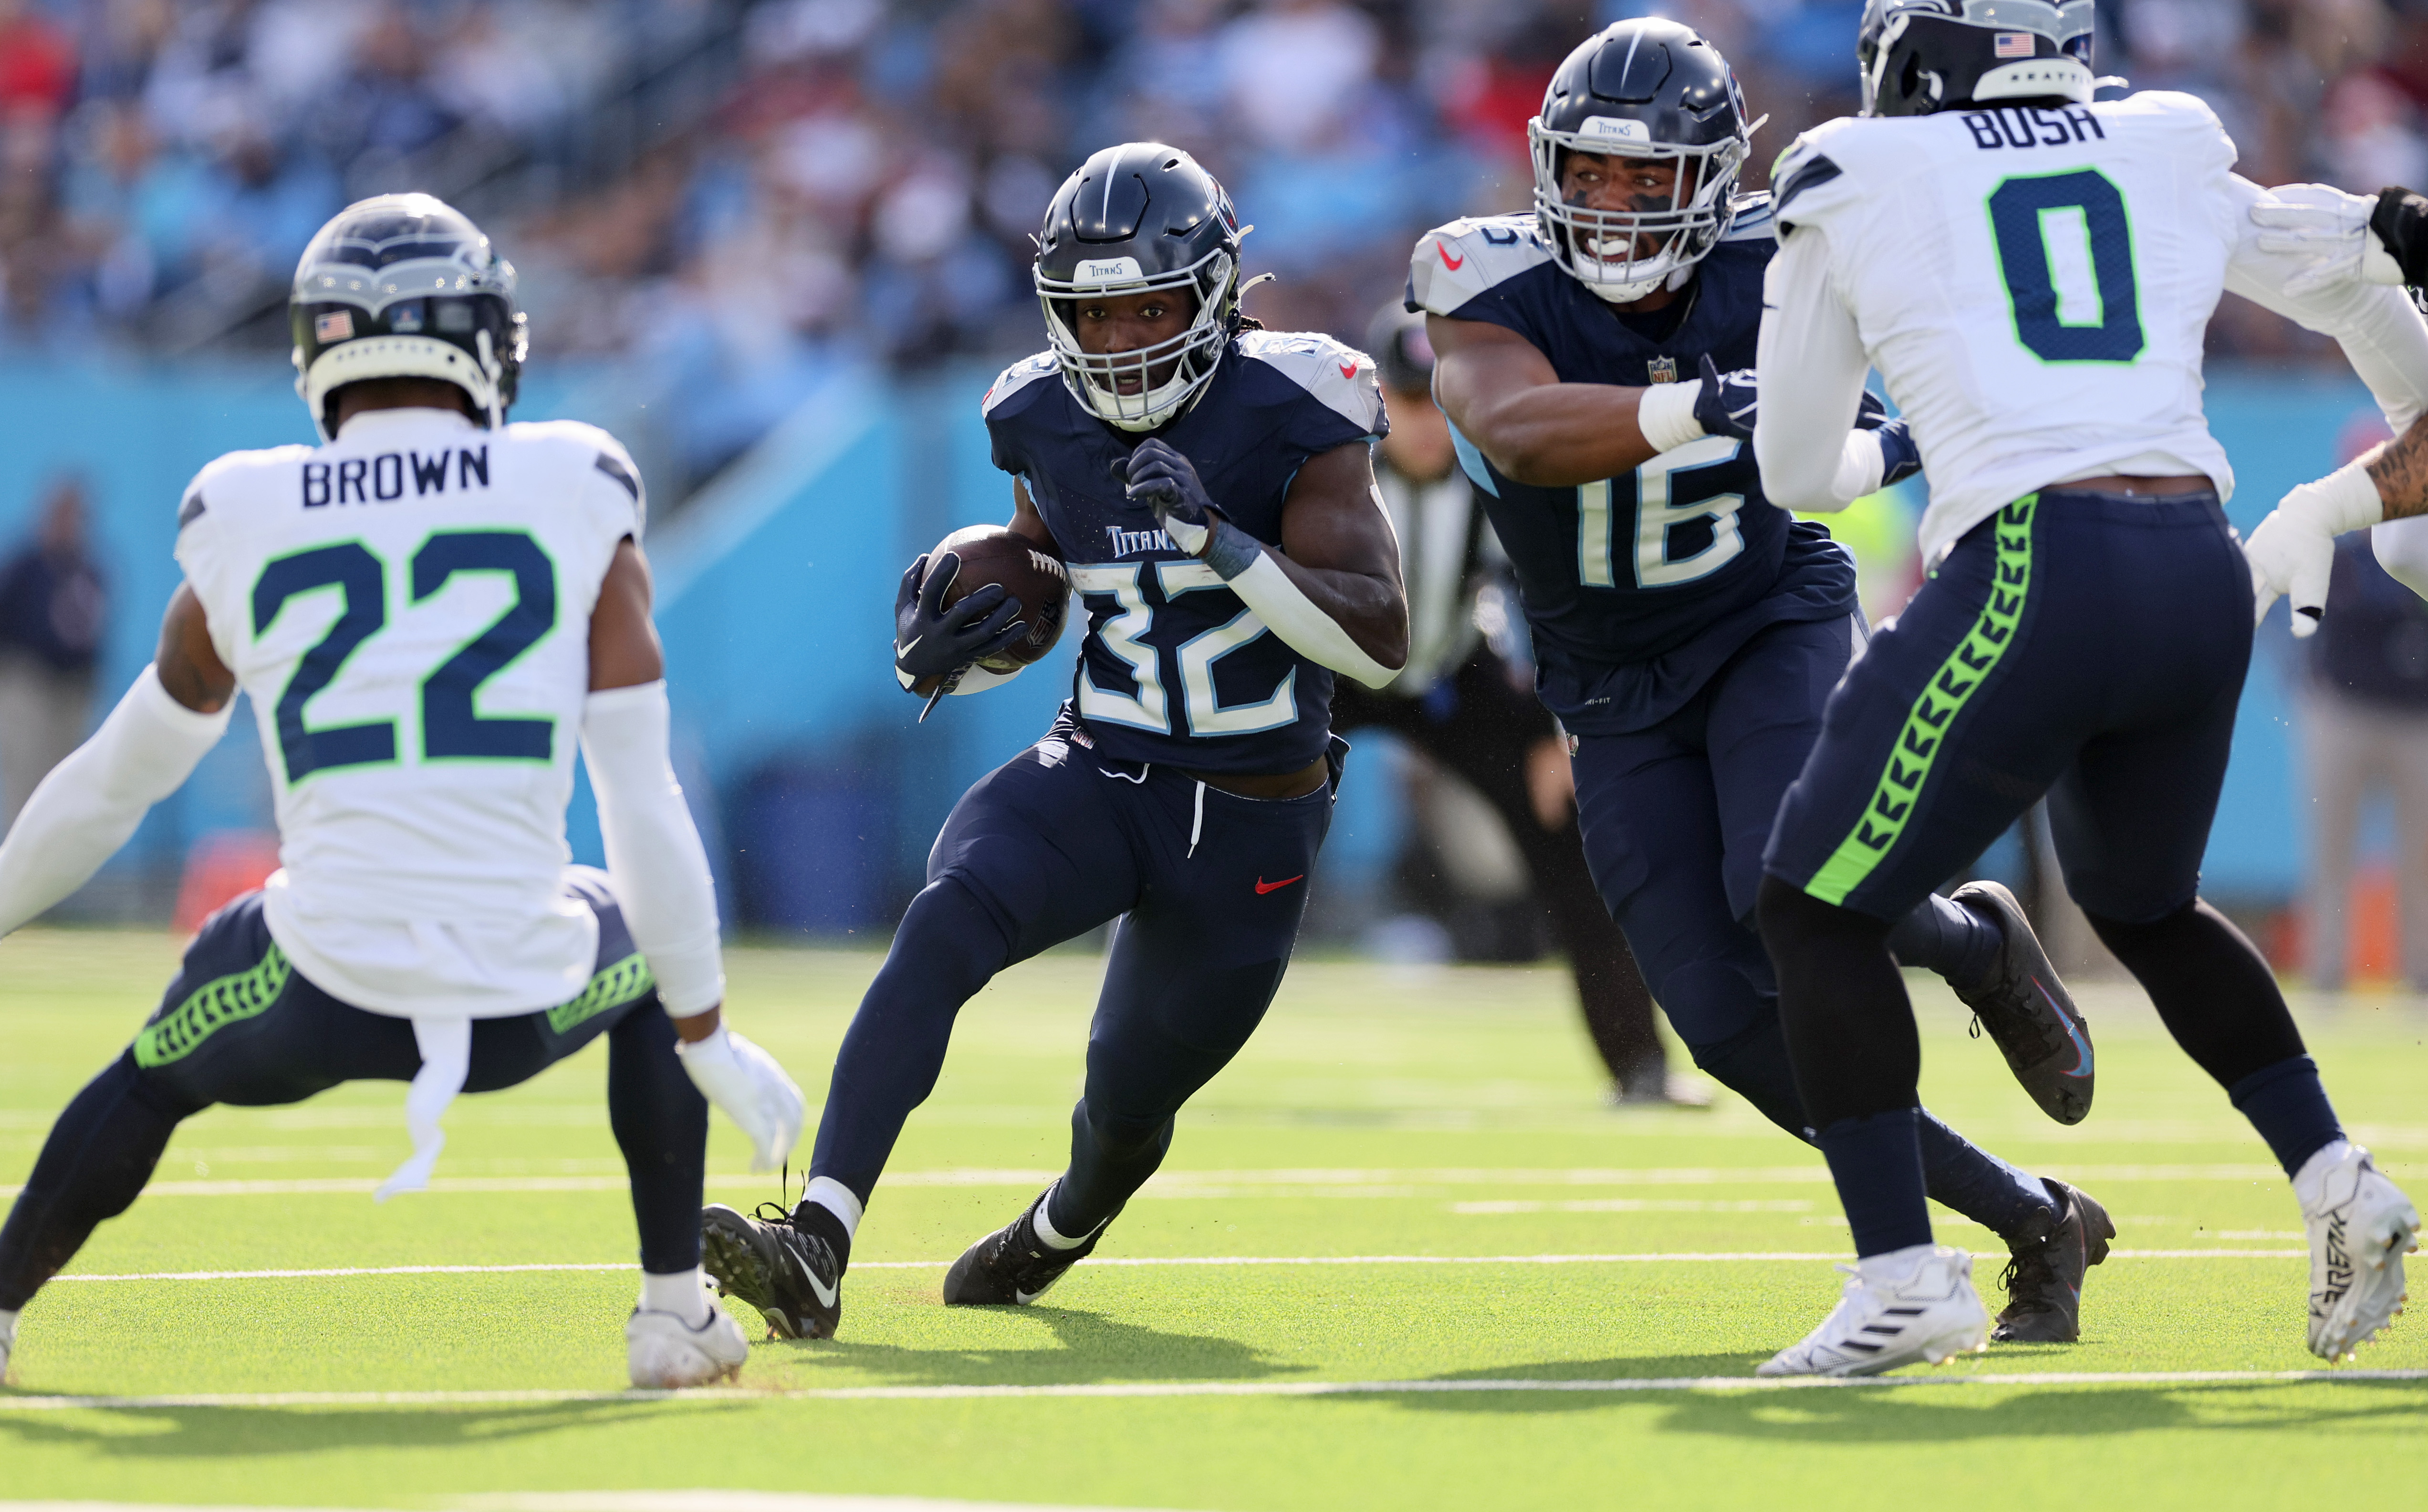 Seattle Seahawks v Tennessee Titans